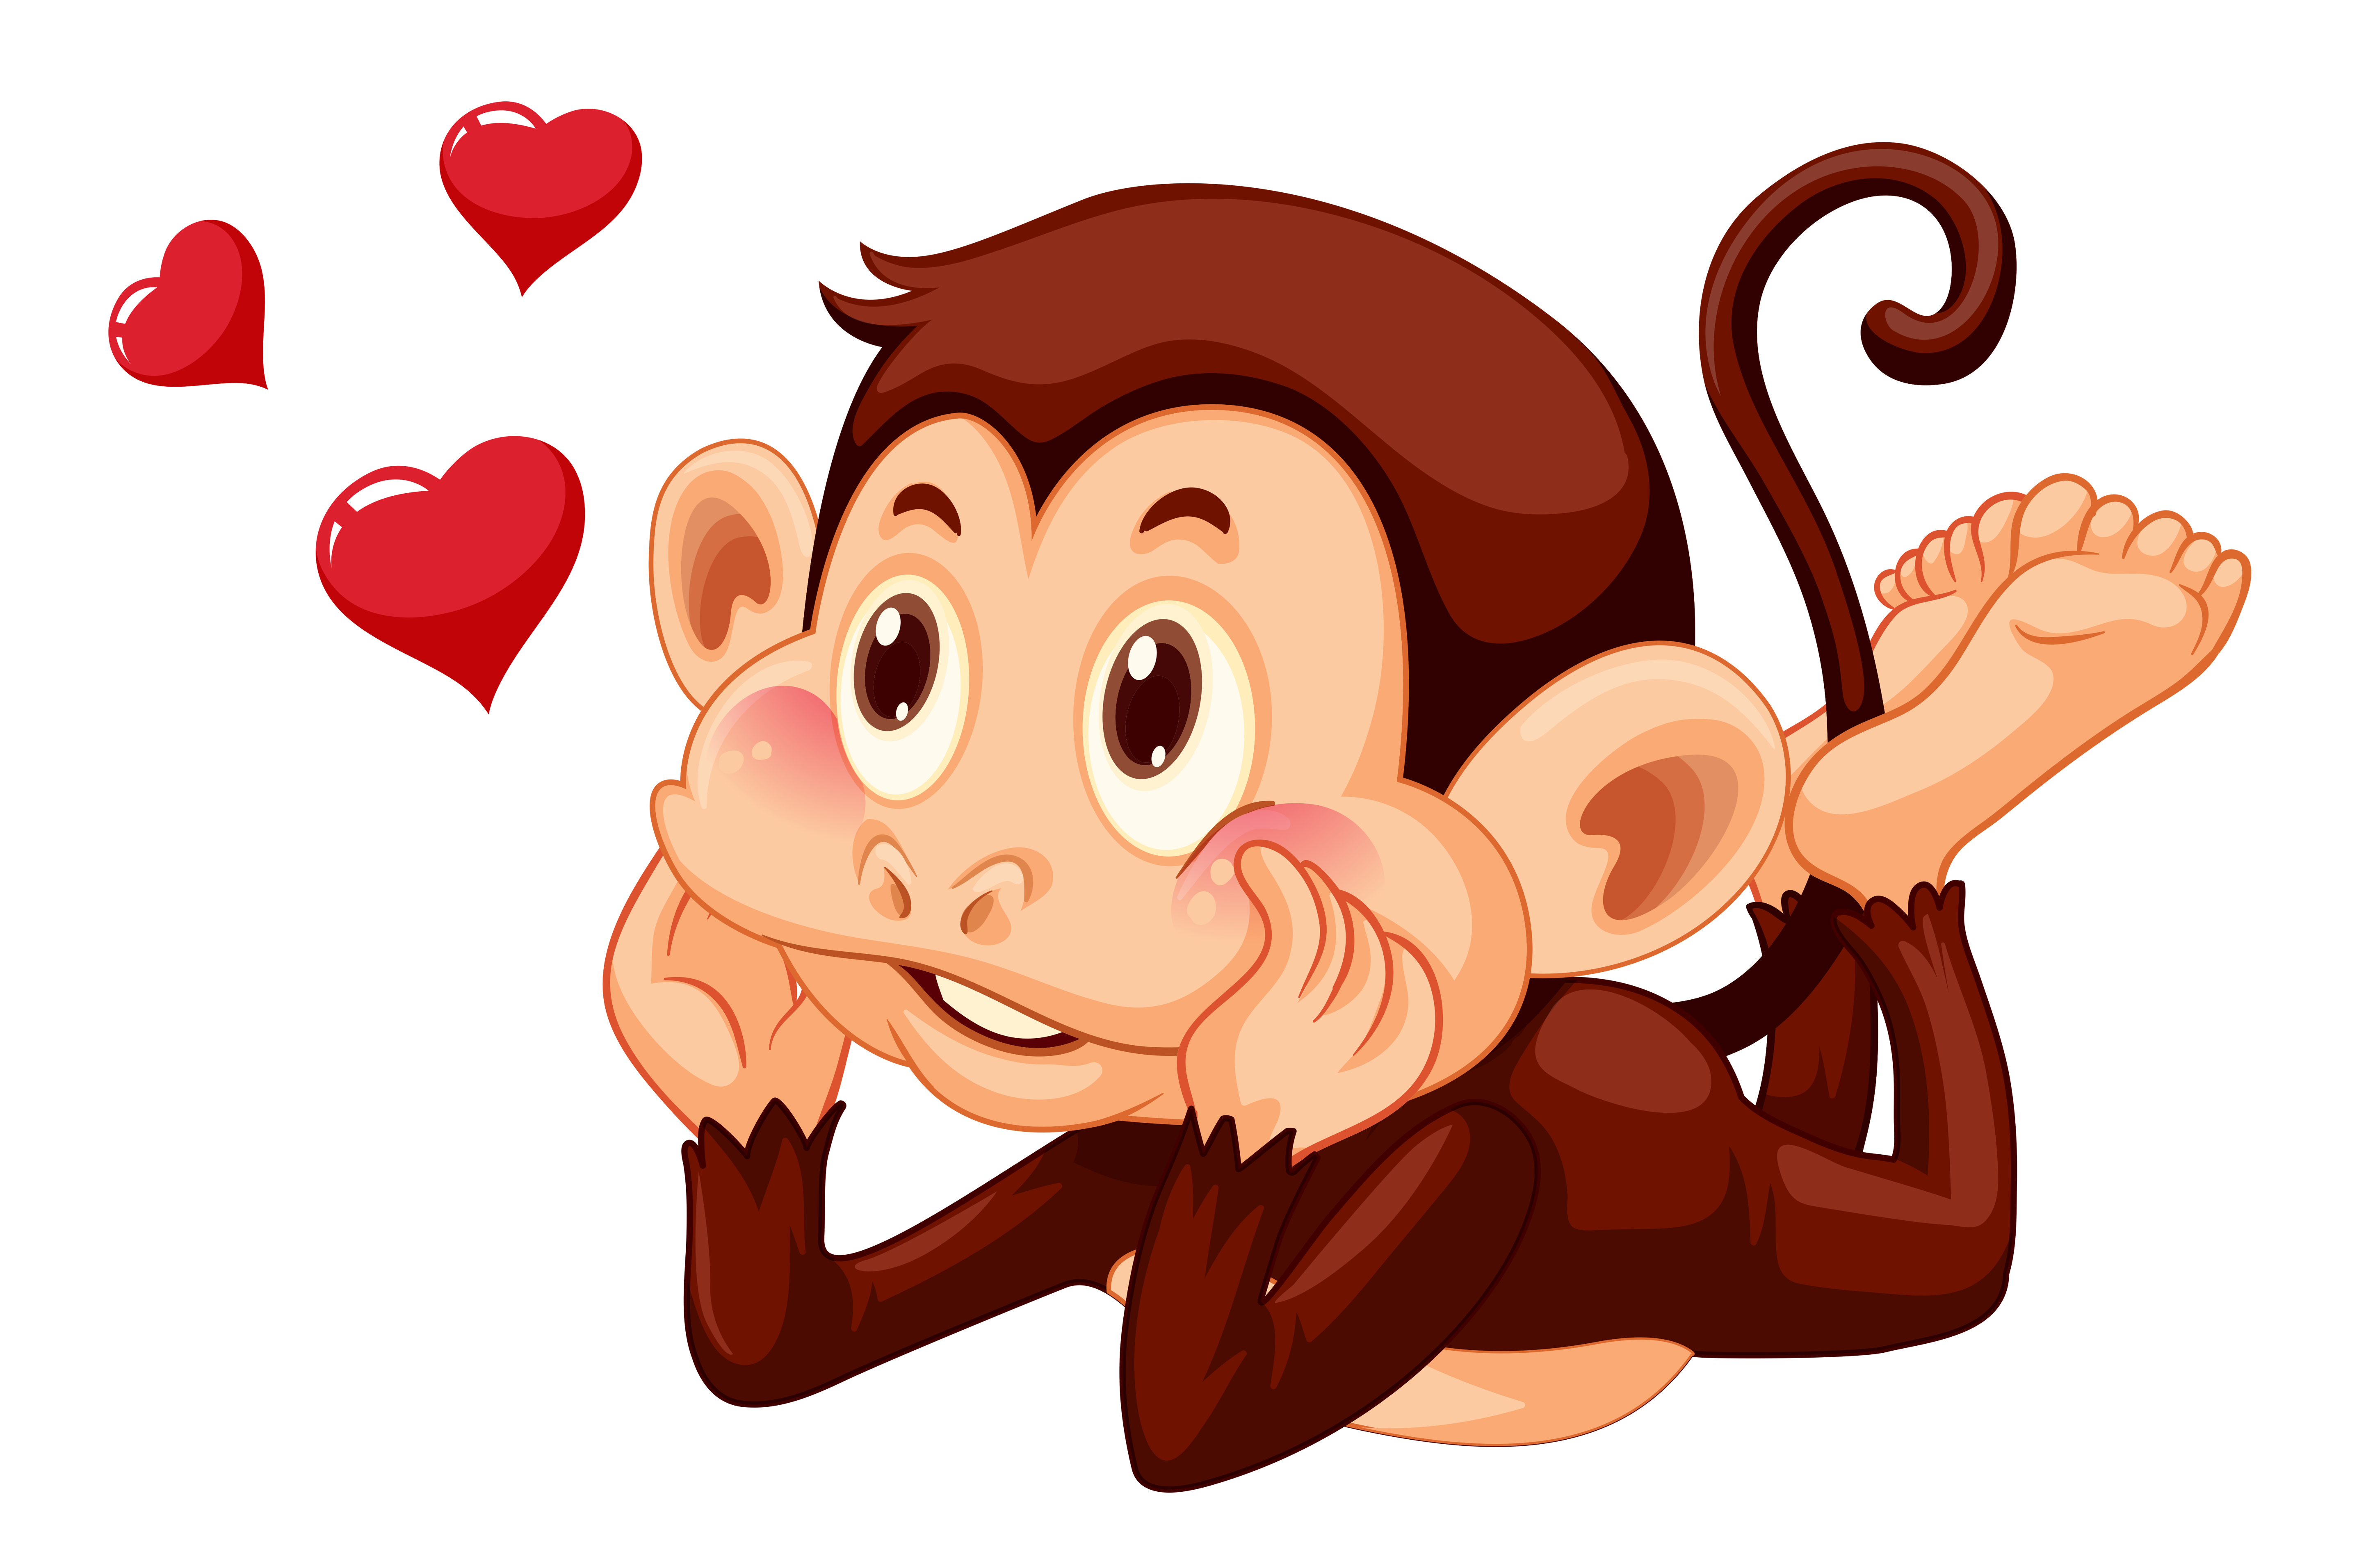 Download A lovely monkey on white background 446463 - Download Free Vectors, Clipart Graphics & Vector Art